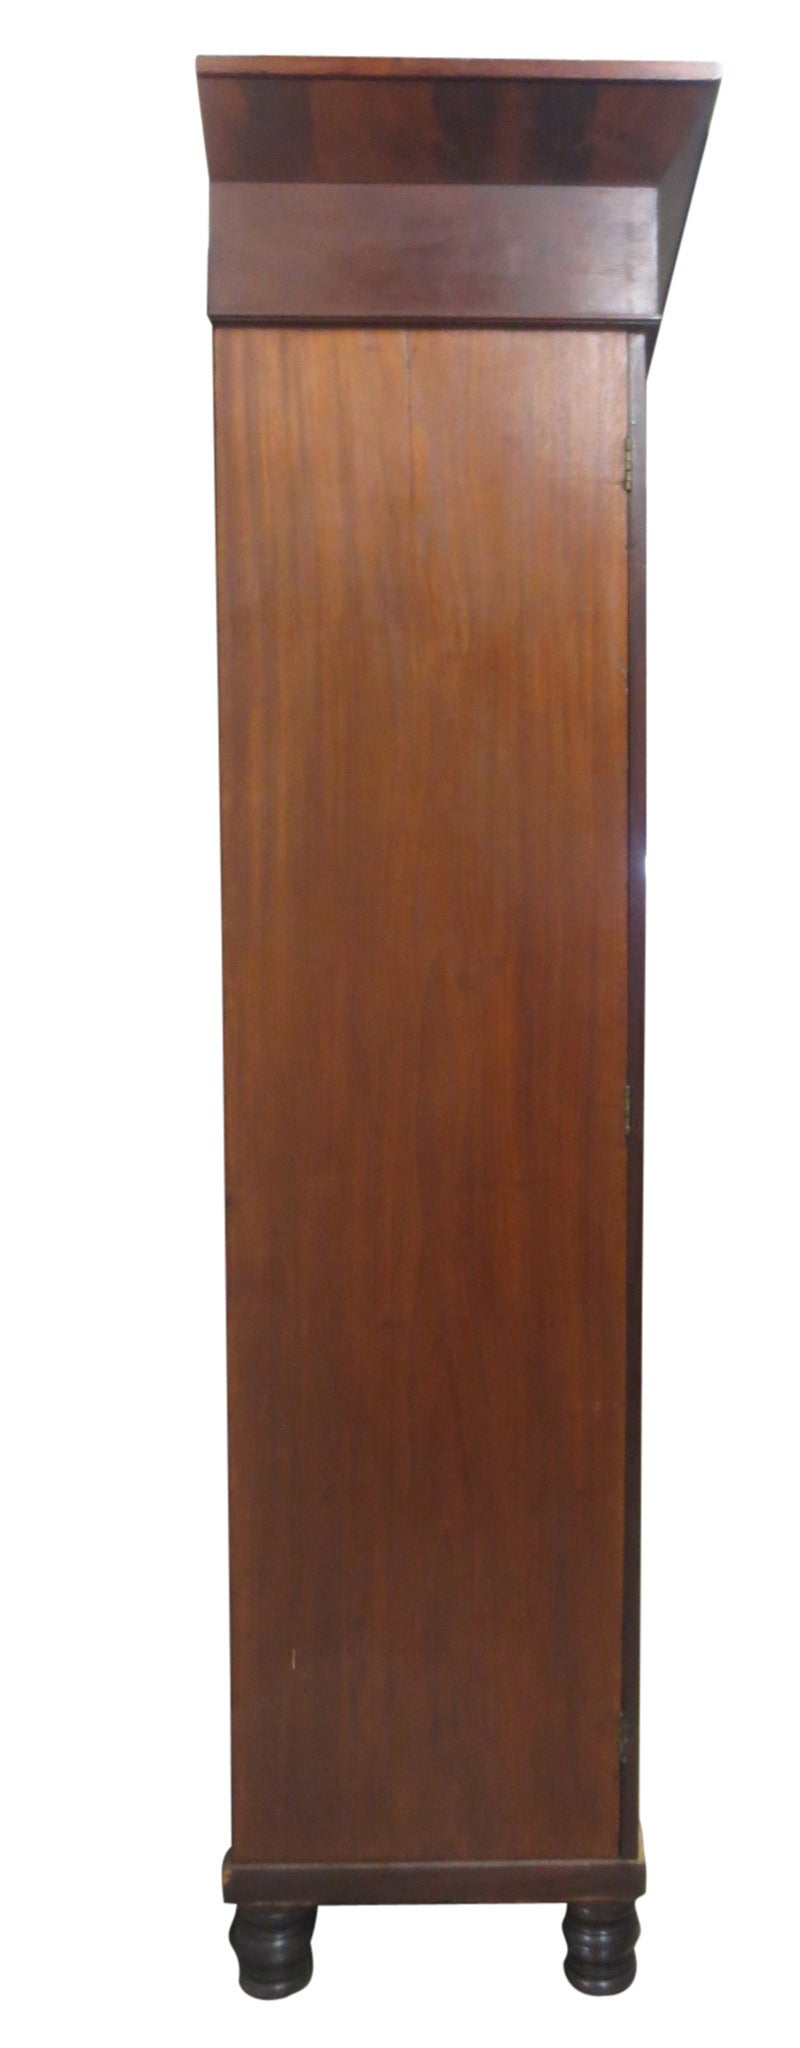 Empire Mahogany Armoire In Excellent Condition For Sale In Holliston, MA